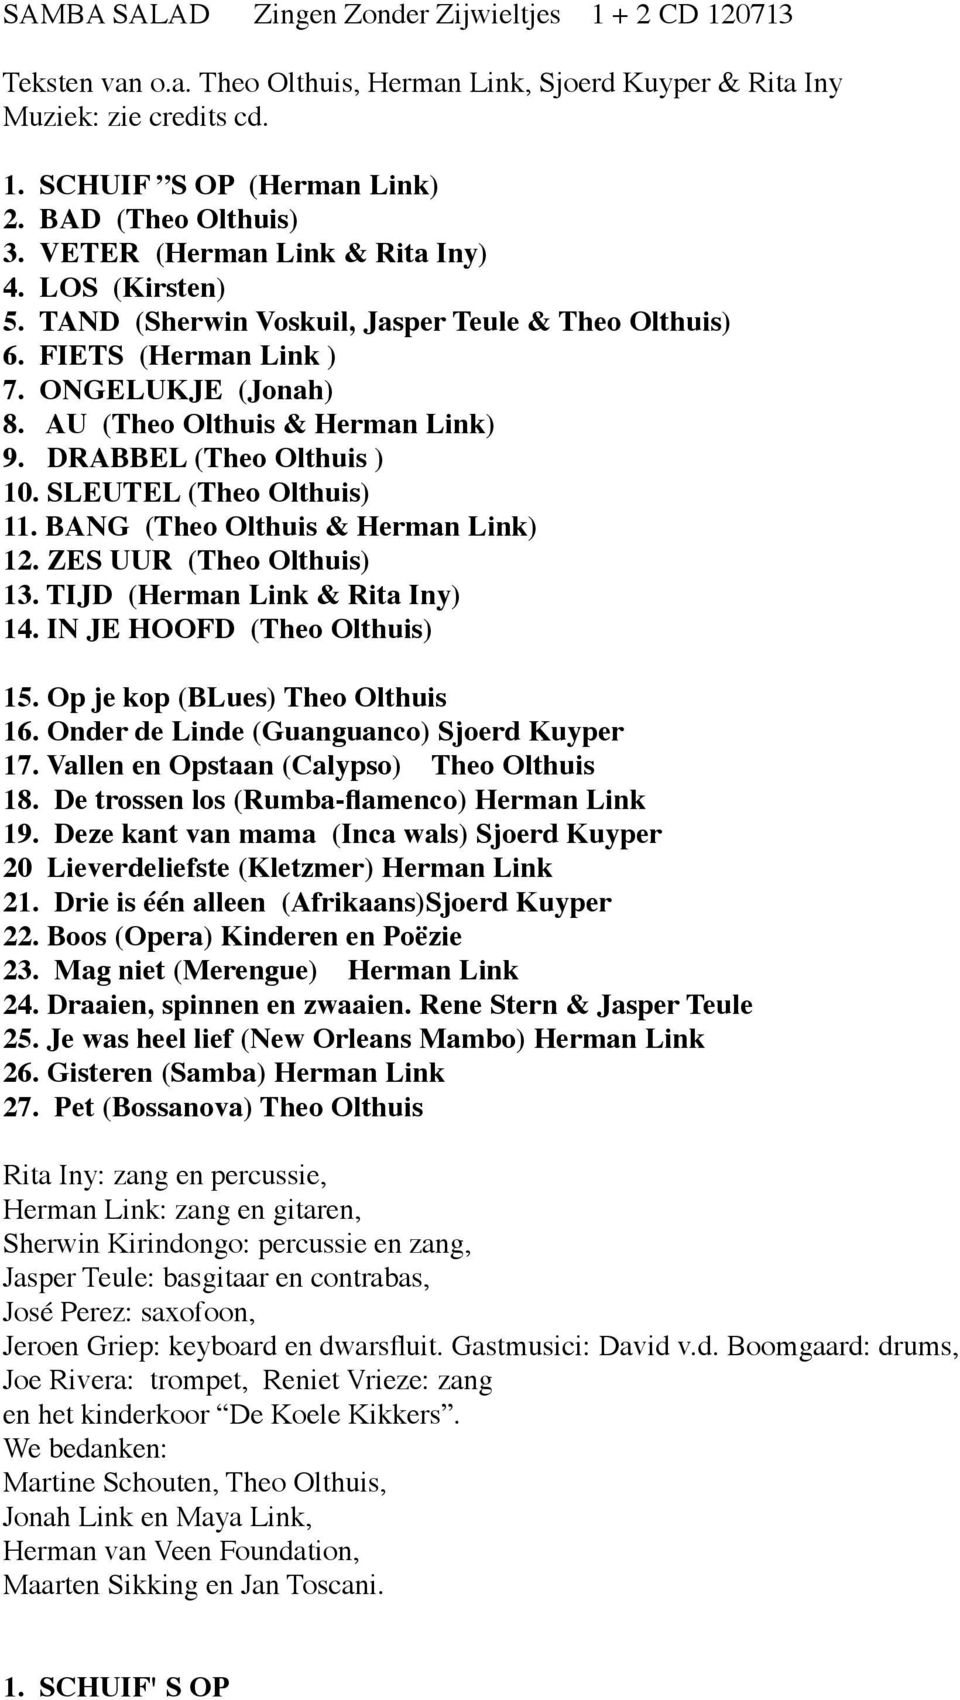 DRABBEL (Theo Olthuis ) 10. SLEUTEL (Theo Olthuis) 11. BANG (Theo Olthuis & Herman Link) 12. ZES UUR (Theo Olthuis) 13. TIJD (Herman Link & Rita Iny) 14. IN JE HOOFD (Theo Olthuis) 15.